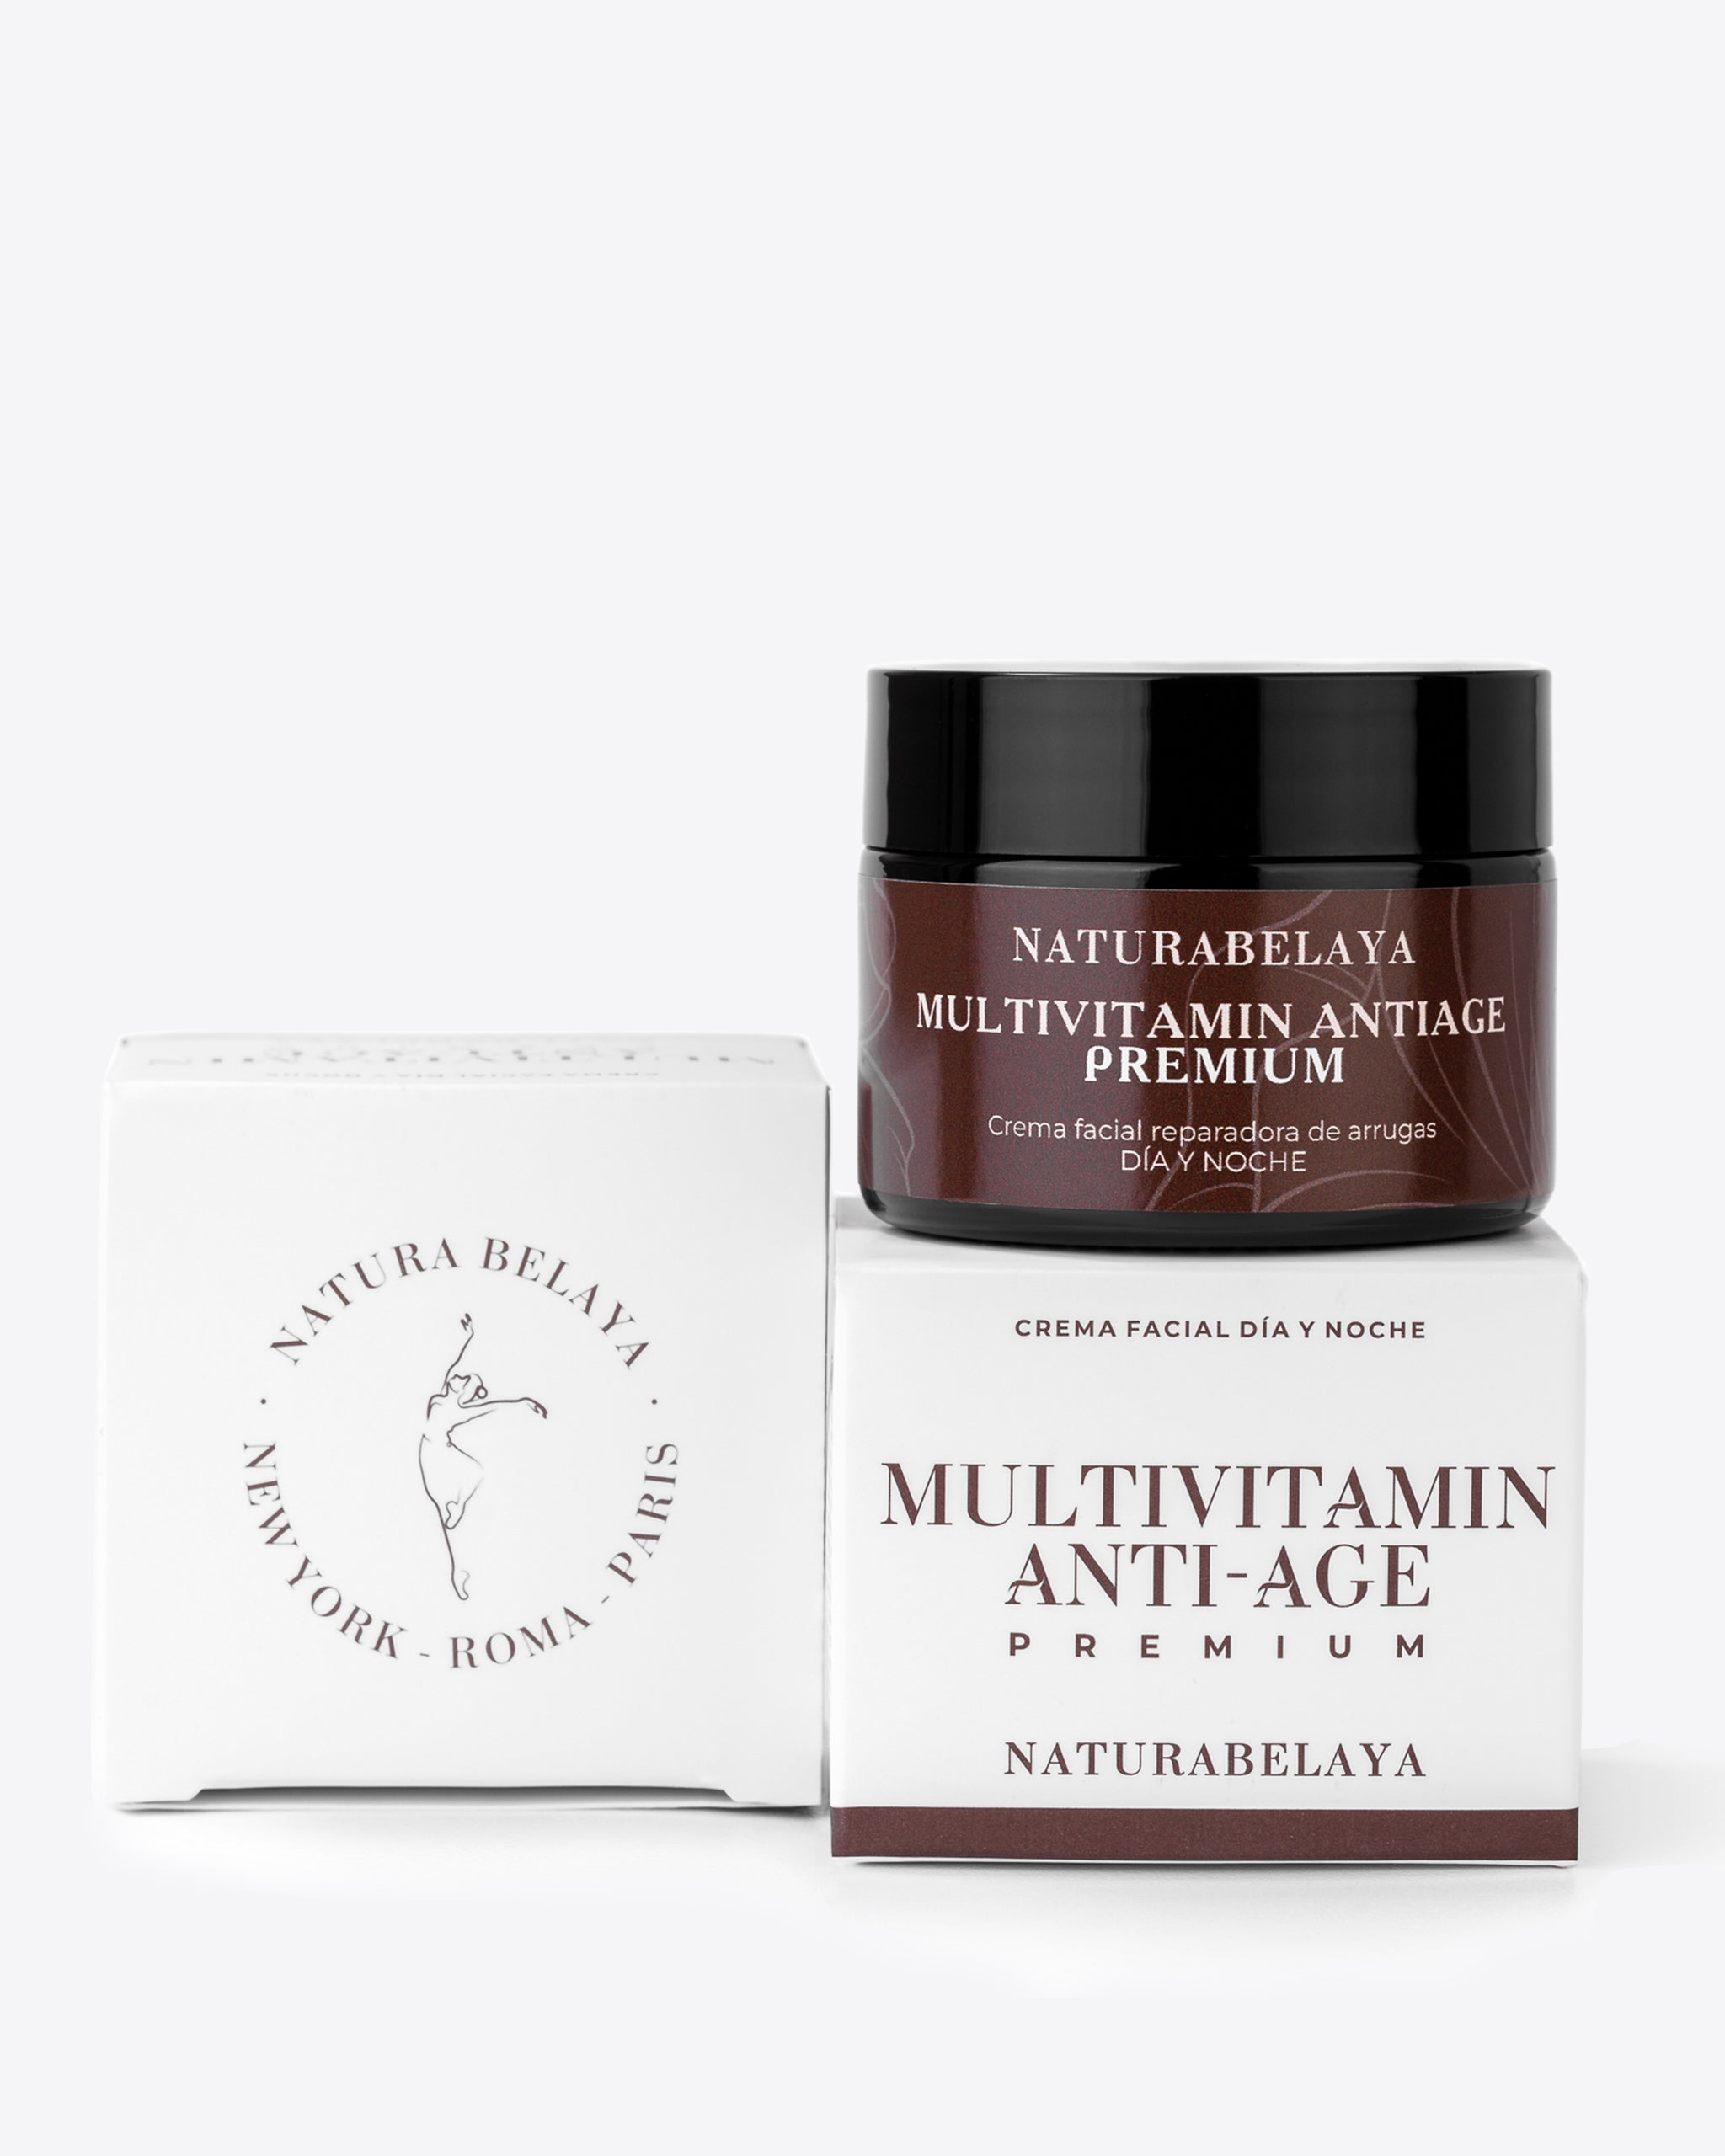 MULTIVITAMIN ANTIAGE anti-wrinkle cream for all skin types